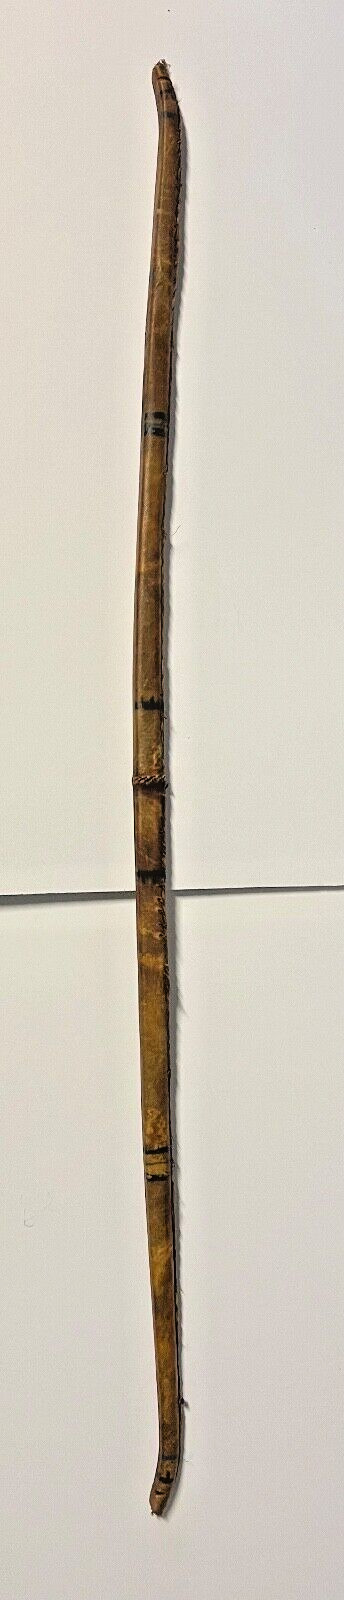 Antique Native American Indian Wood Bow; Hide Wrapped; Sinew Sewn; 1880s-1910s